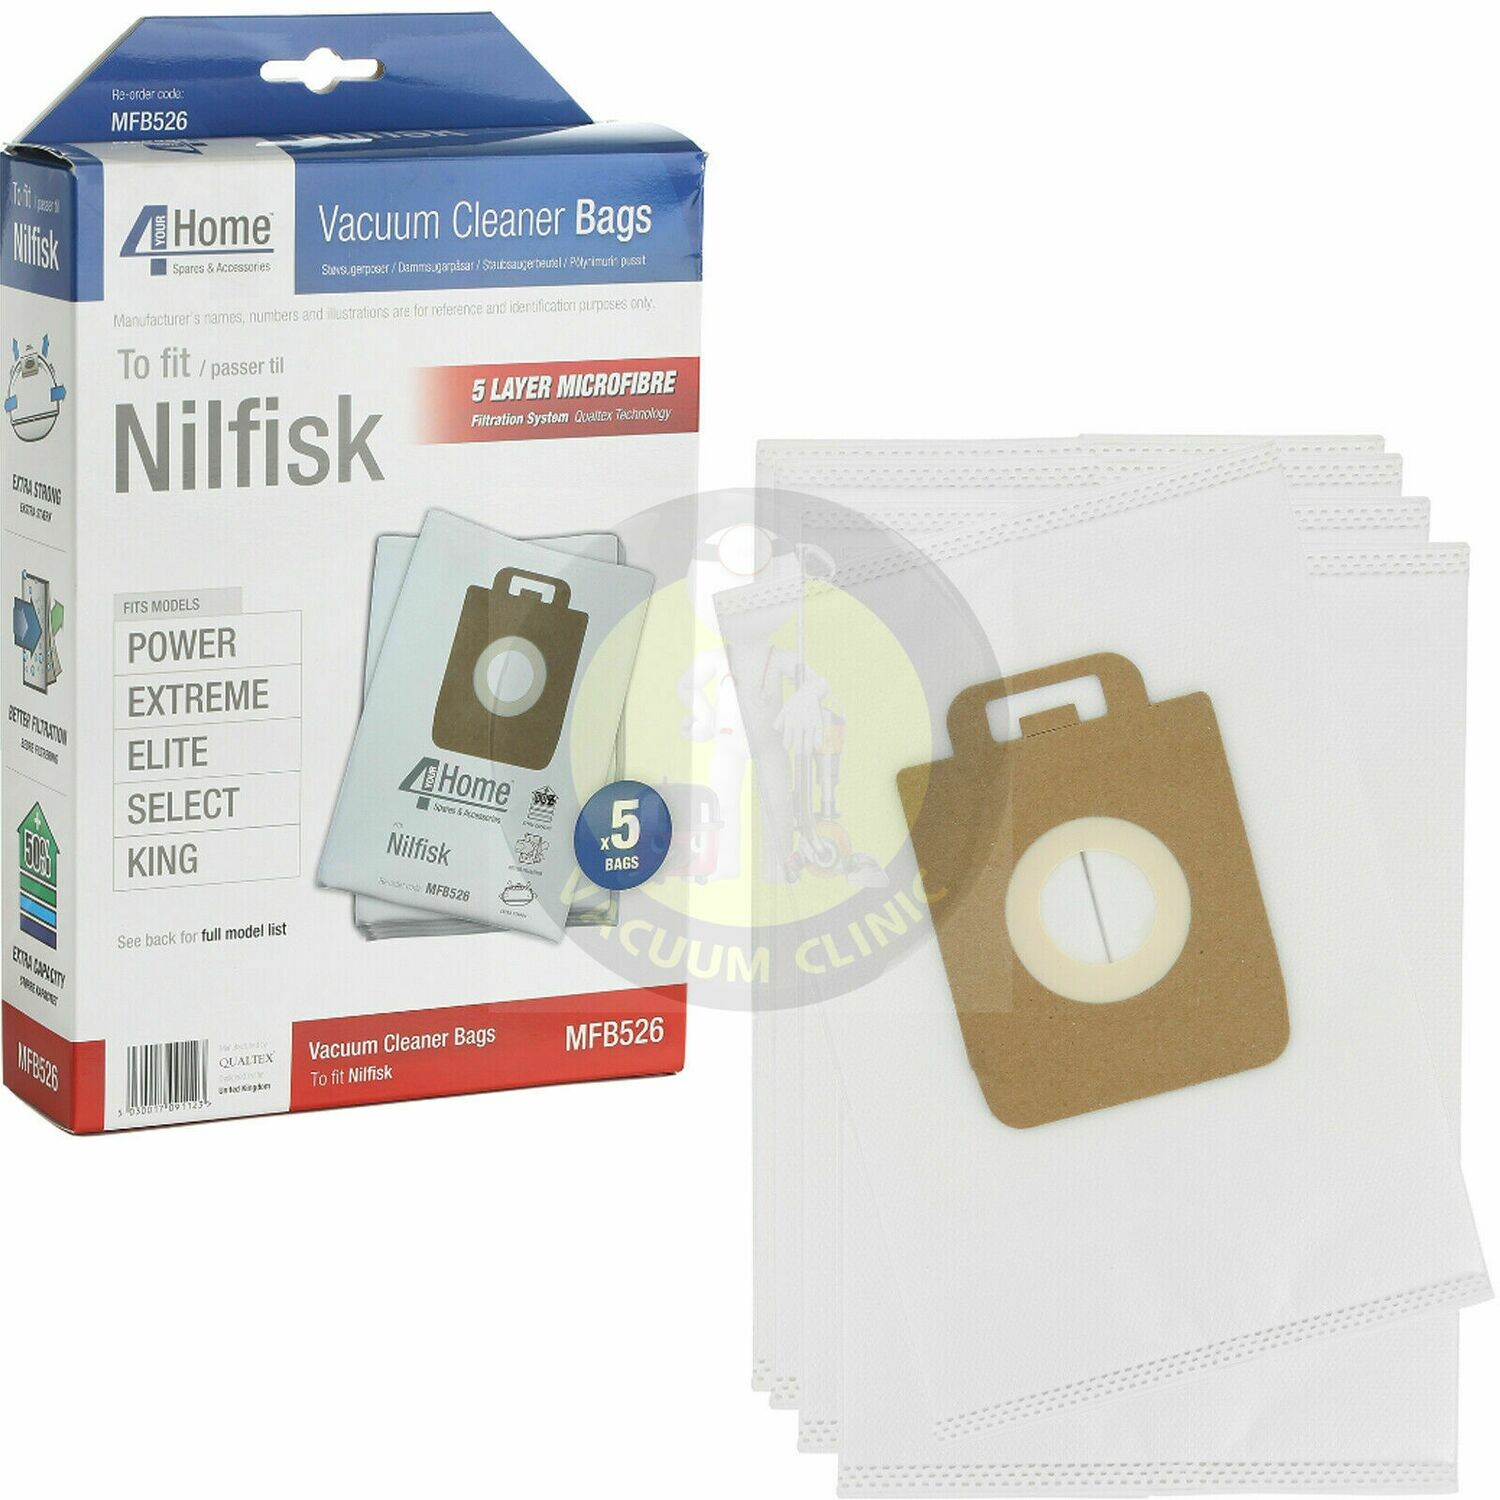 NILFISK MICROFIBRE BAGS TO FIT NILFISK EXTREME/POWER X 5+1 FILTER (0605.0905) QUAMFB526